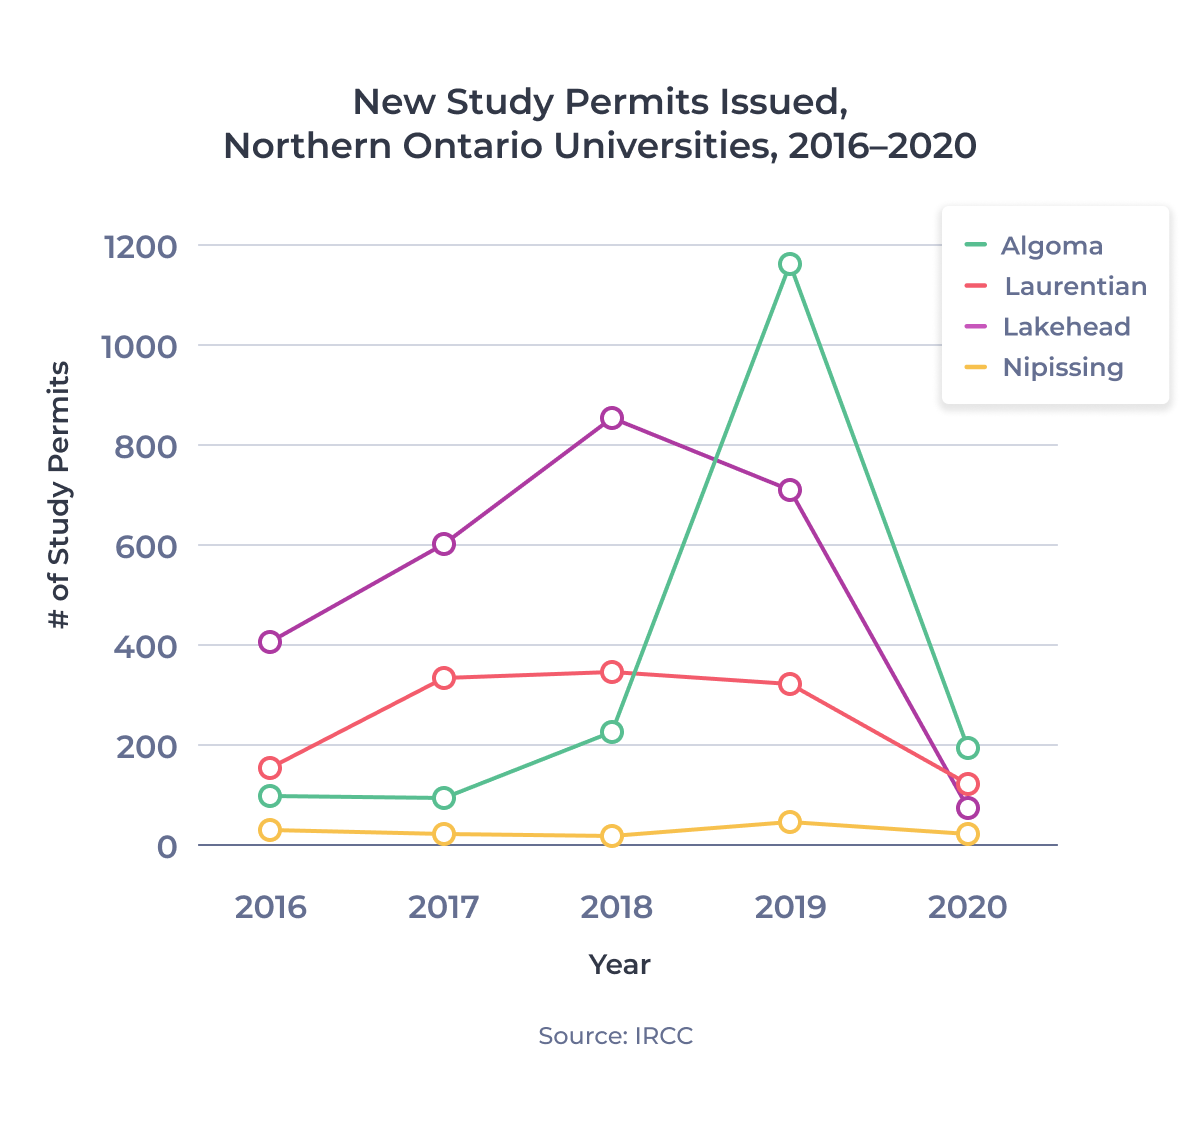 Line chart showing new study permits issued for Northern Ontario universities between 2016 and 2020. Examined in detail below.